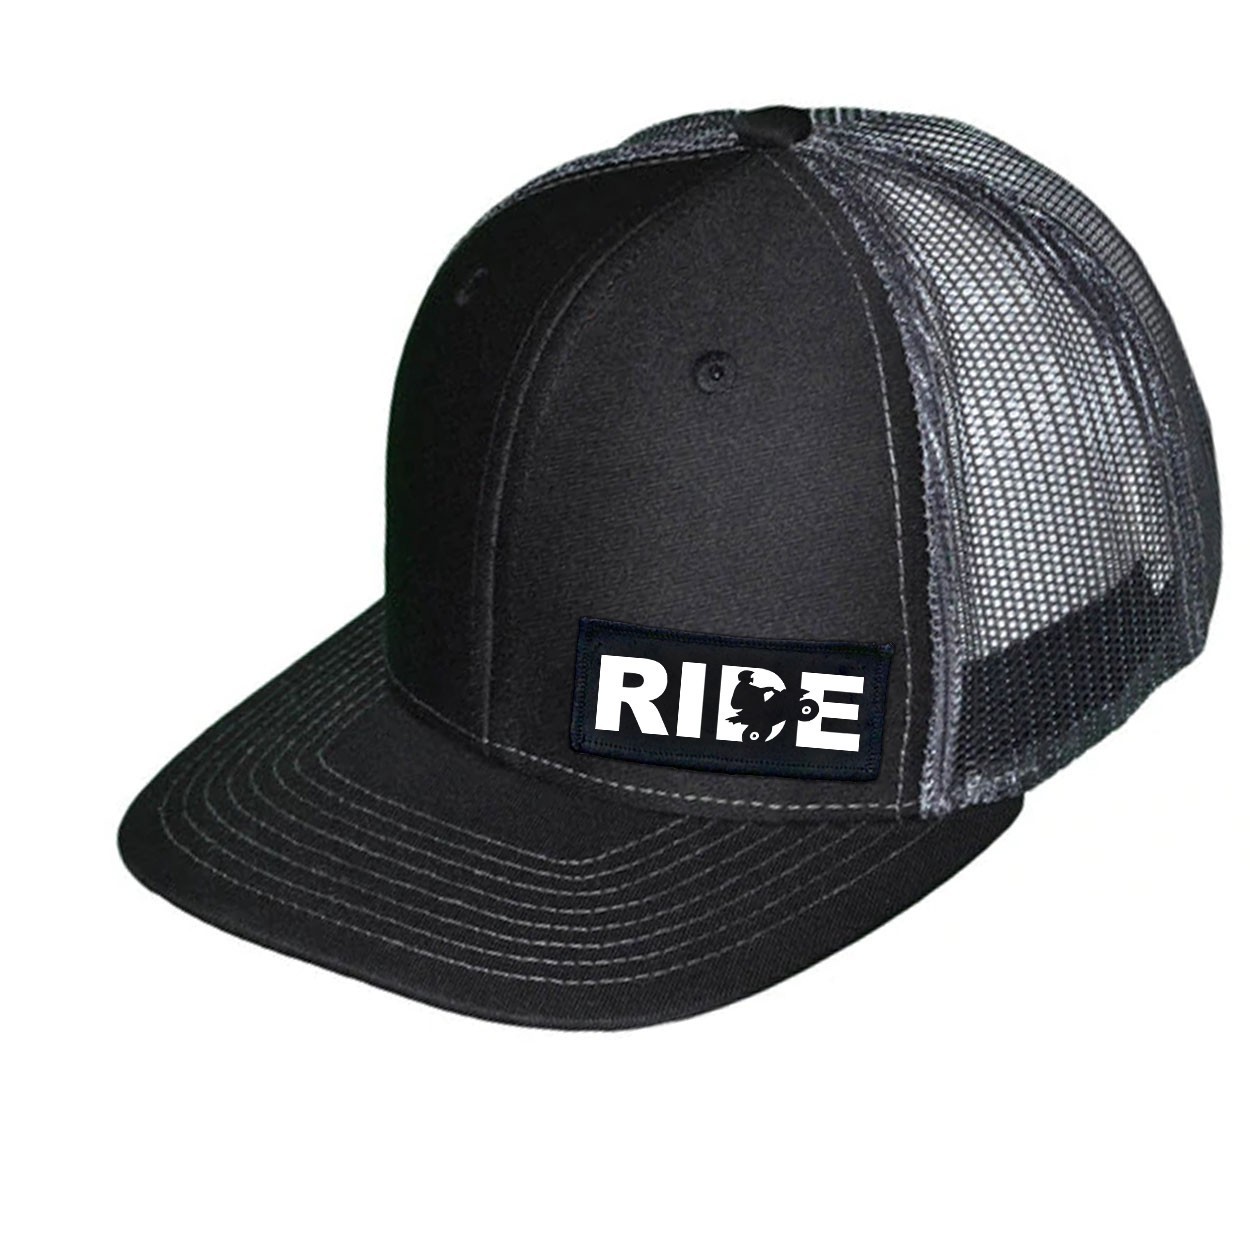 Ride ATV Logo Night Out Woven Patch Snapback Trucker Hat Black/Charcoal (White Logo)